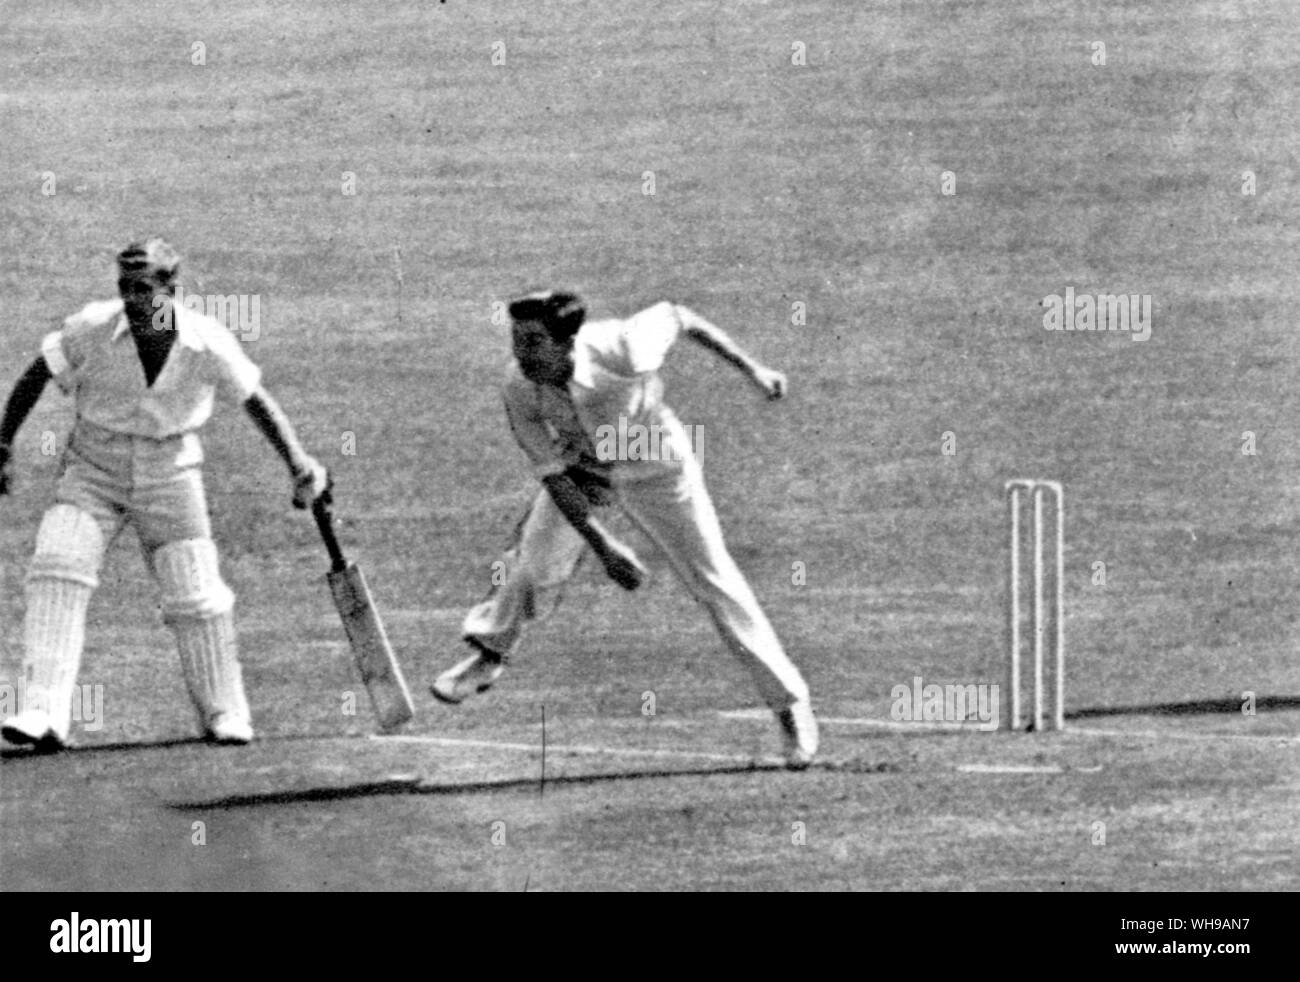 Douglas V P Wright bowling for England against New Zealand at the Oval in 1949. B Sutcliffe is the batsman and J S Lee the Umpire at the bowler end Stock Photo